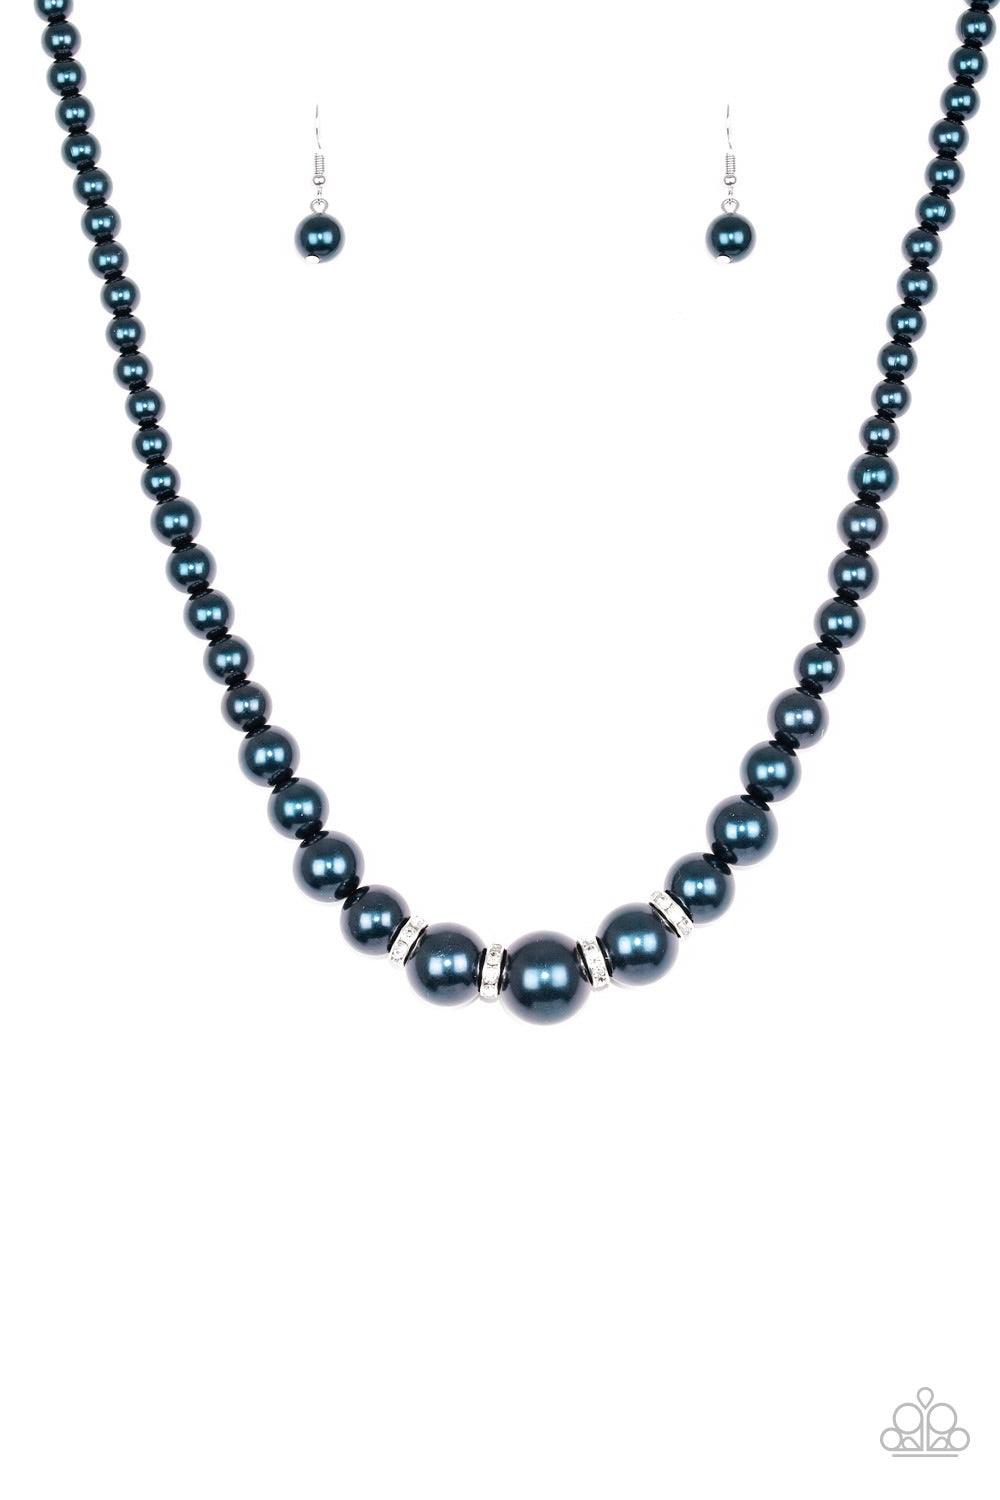 Paparazzi Accessories Party Pearls - Blue Gradually increasing in size, luminescent blue pearls trickle below the collar for a classic look. Encrusted in dazzling white rhinestones, glittery rings are sprinkled between the pearls for a timeless finish. Fe